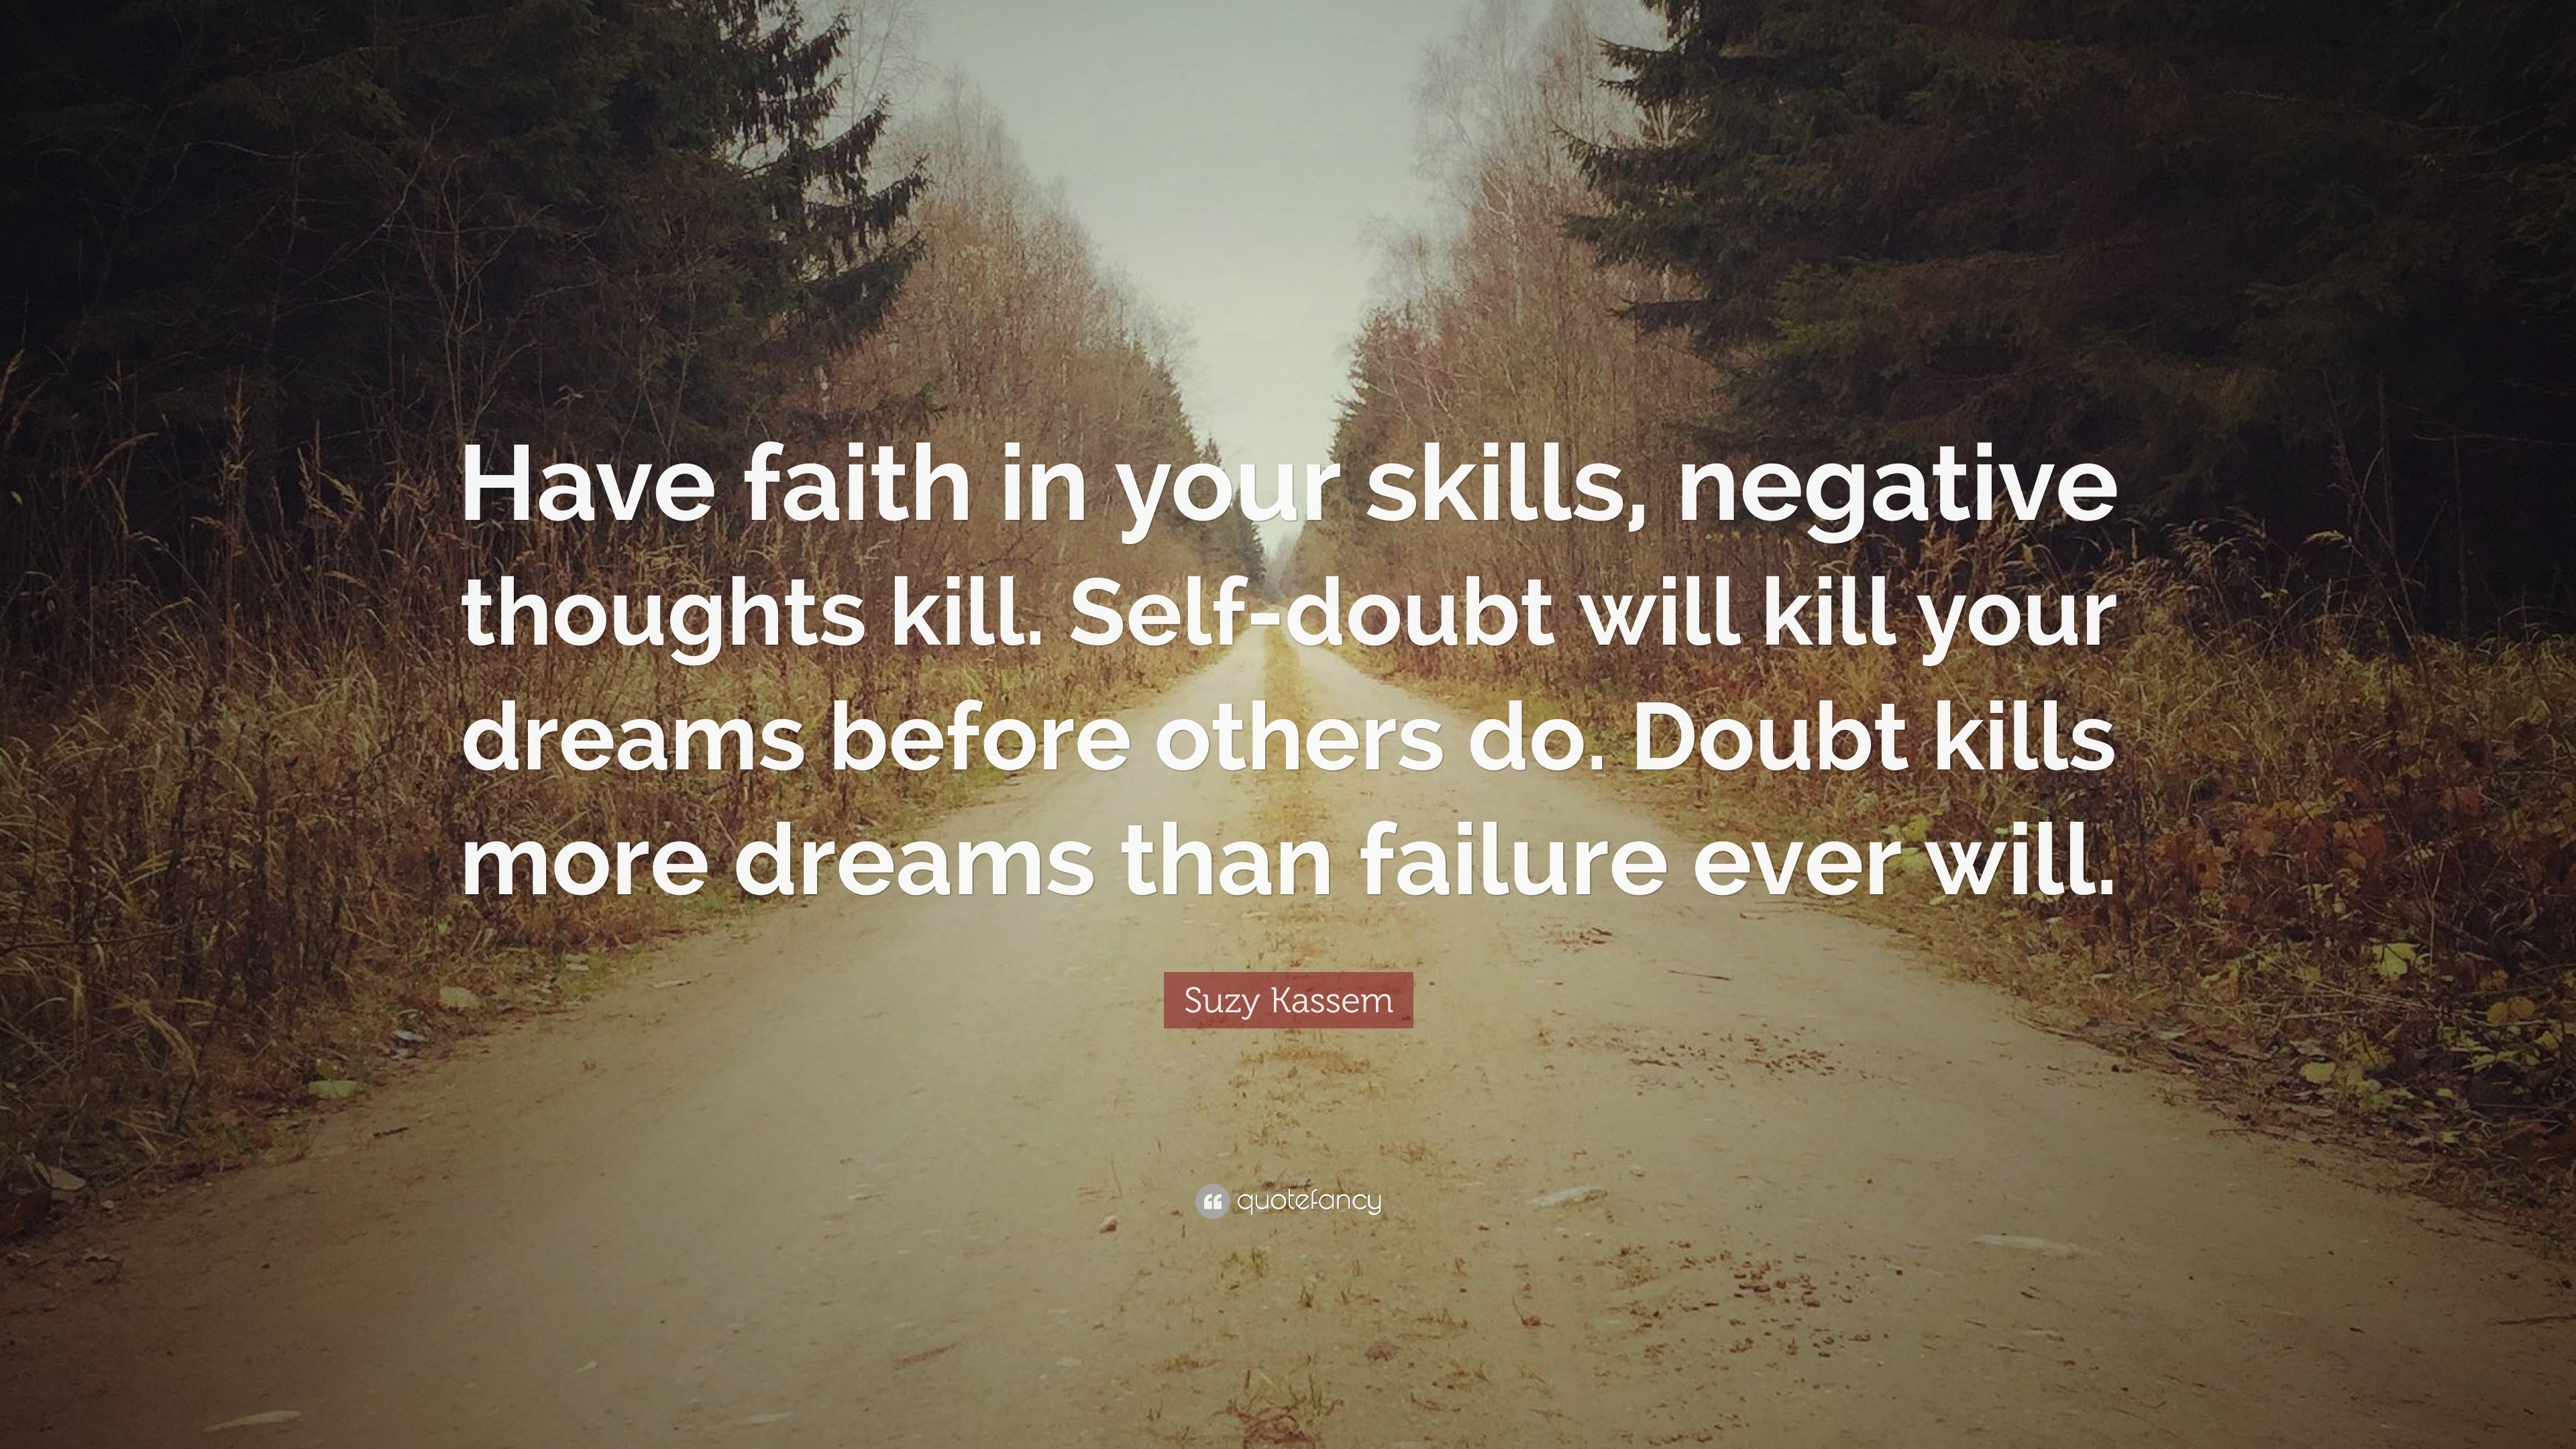 Suzy Kassem Quote: “Have faith in your skills, negative thoughts kill